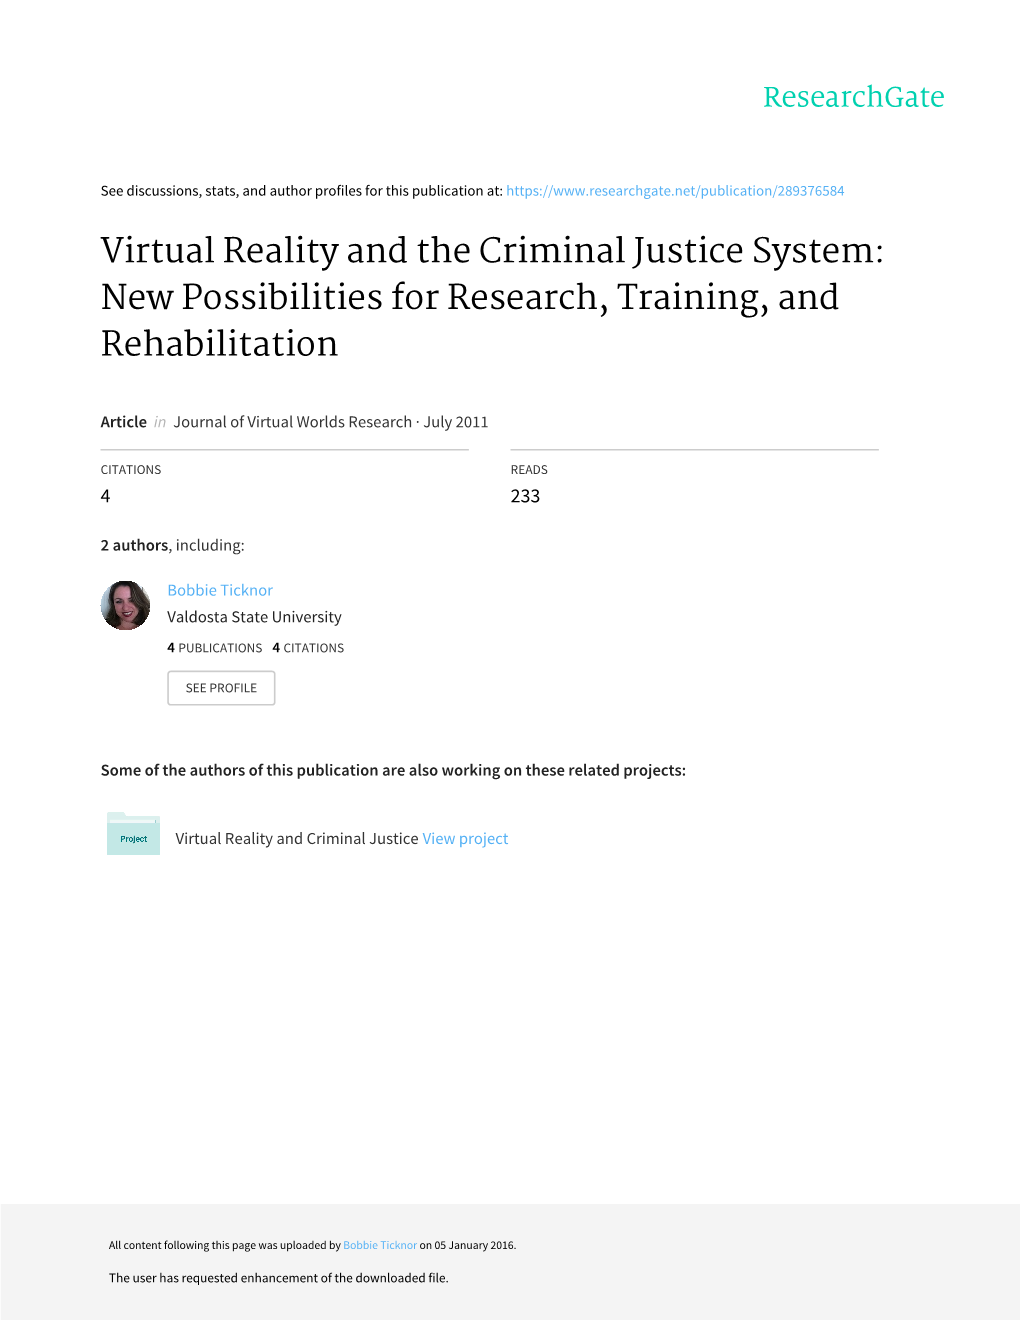 Virtual Reality and the Criminal Justice System: New Possibilities for Research, Training, and Rehabilitation